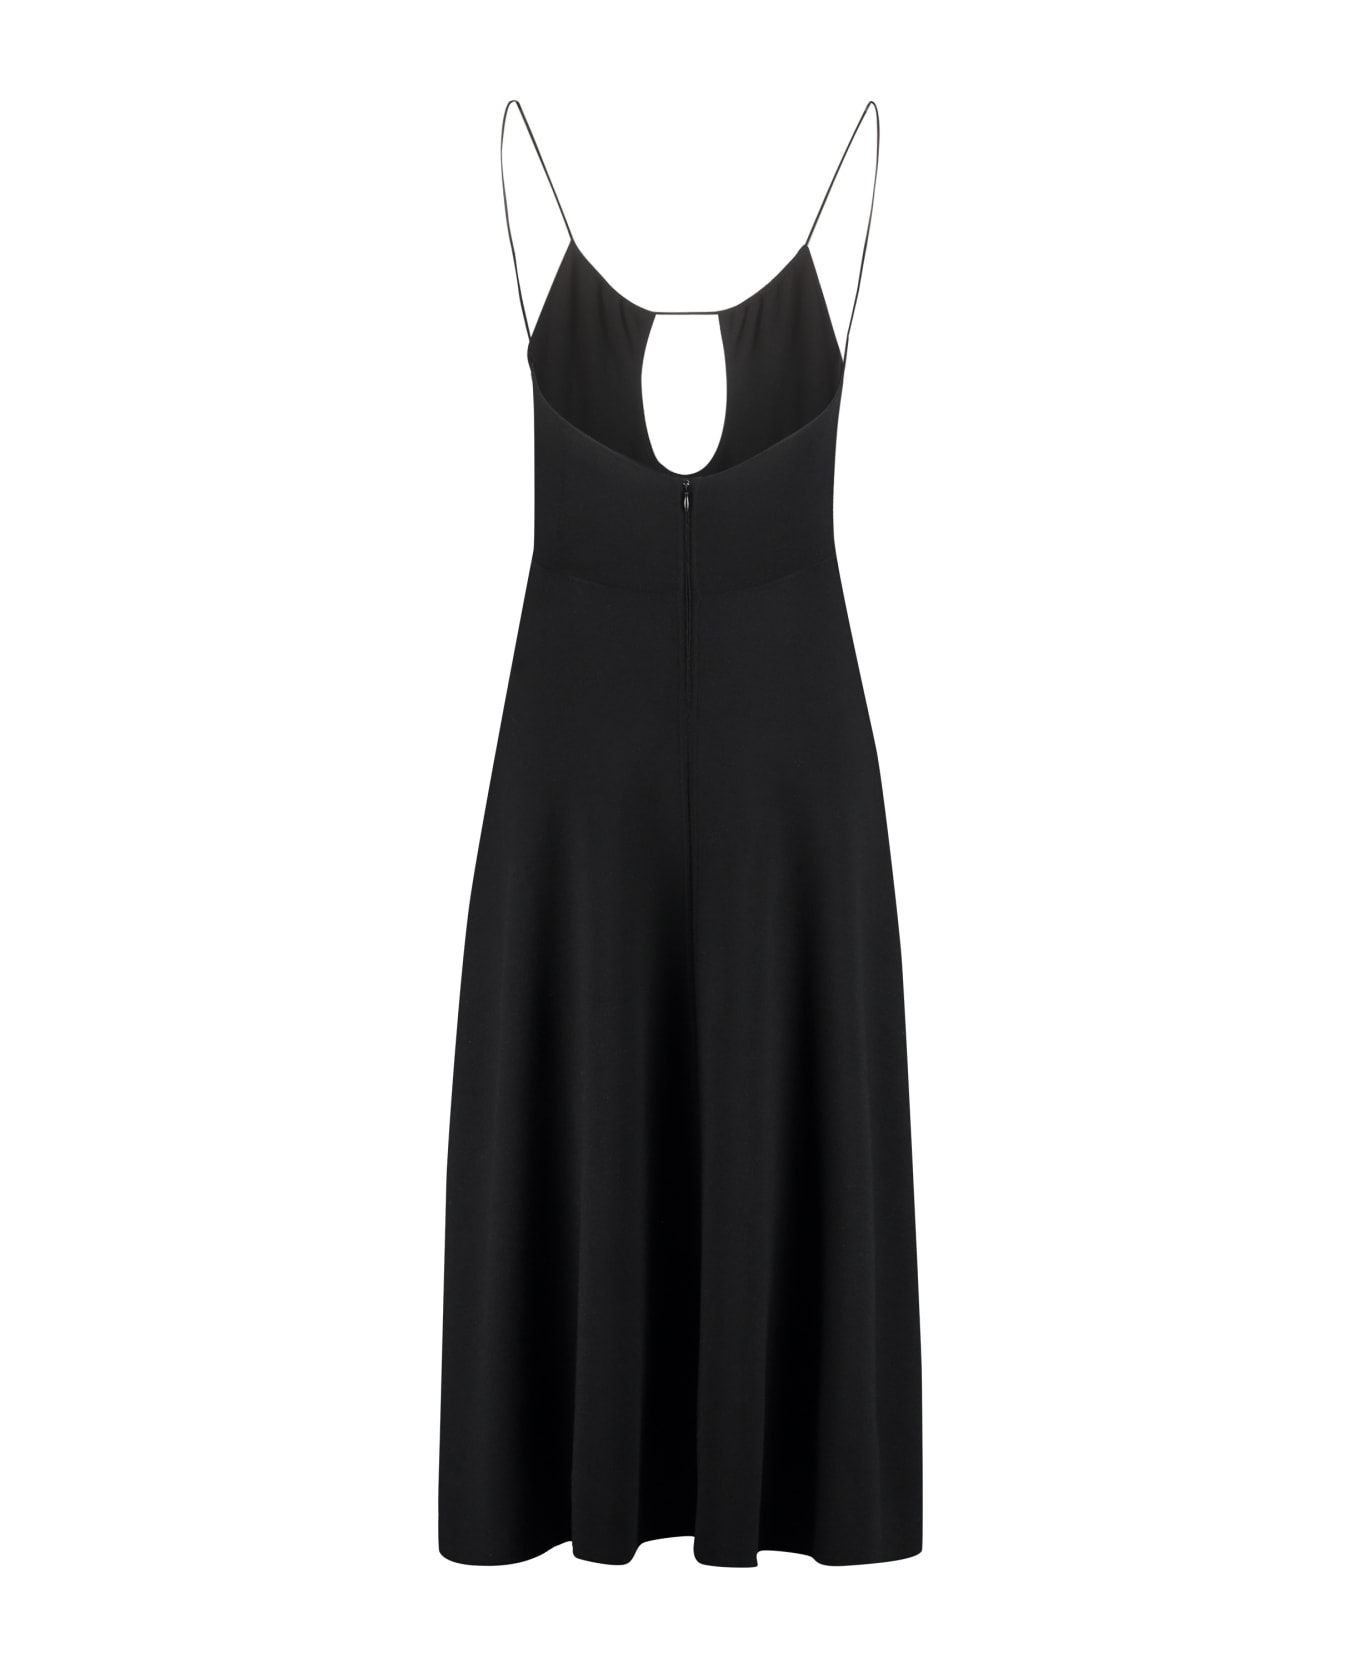 Saint Laurent Cut-out Detail Knitted Dress - NERO